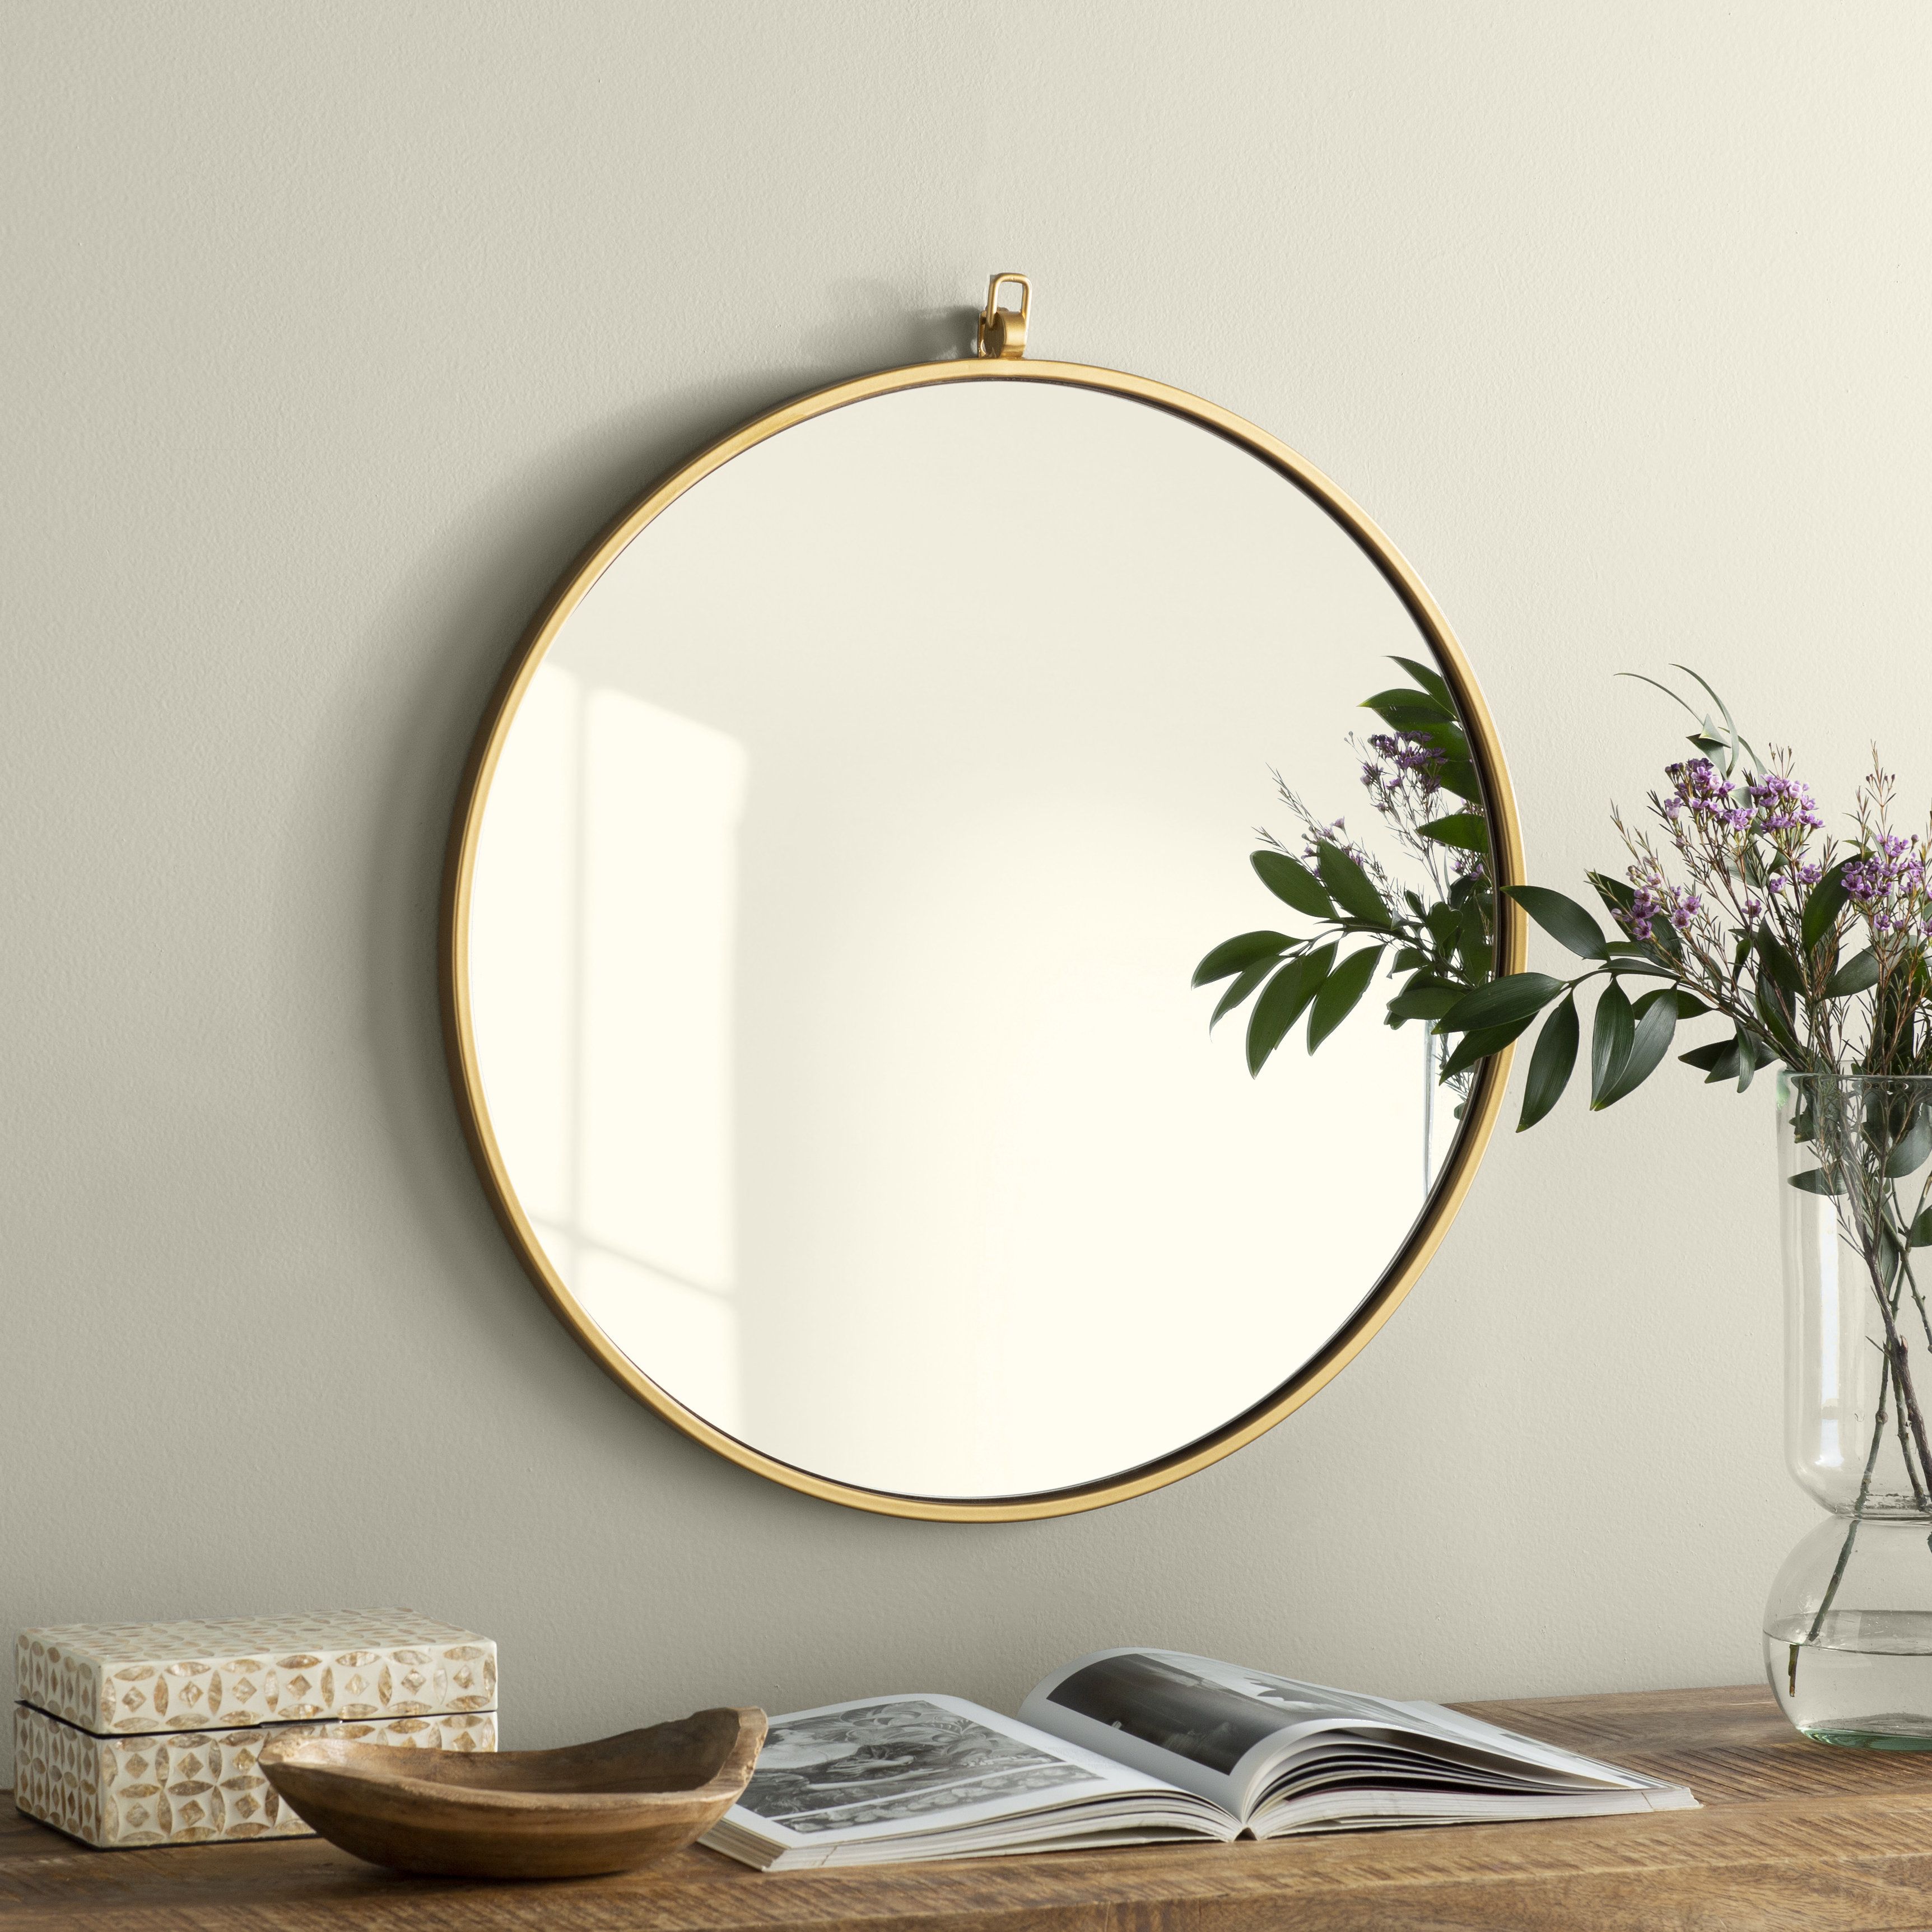 Joss & Main Essentials Accent Mirror & Reviews | Joss & Main Within Minerva Accent Mirrors (View 15 of 30)